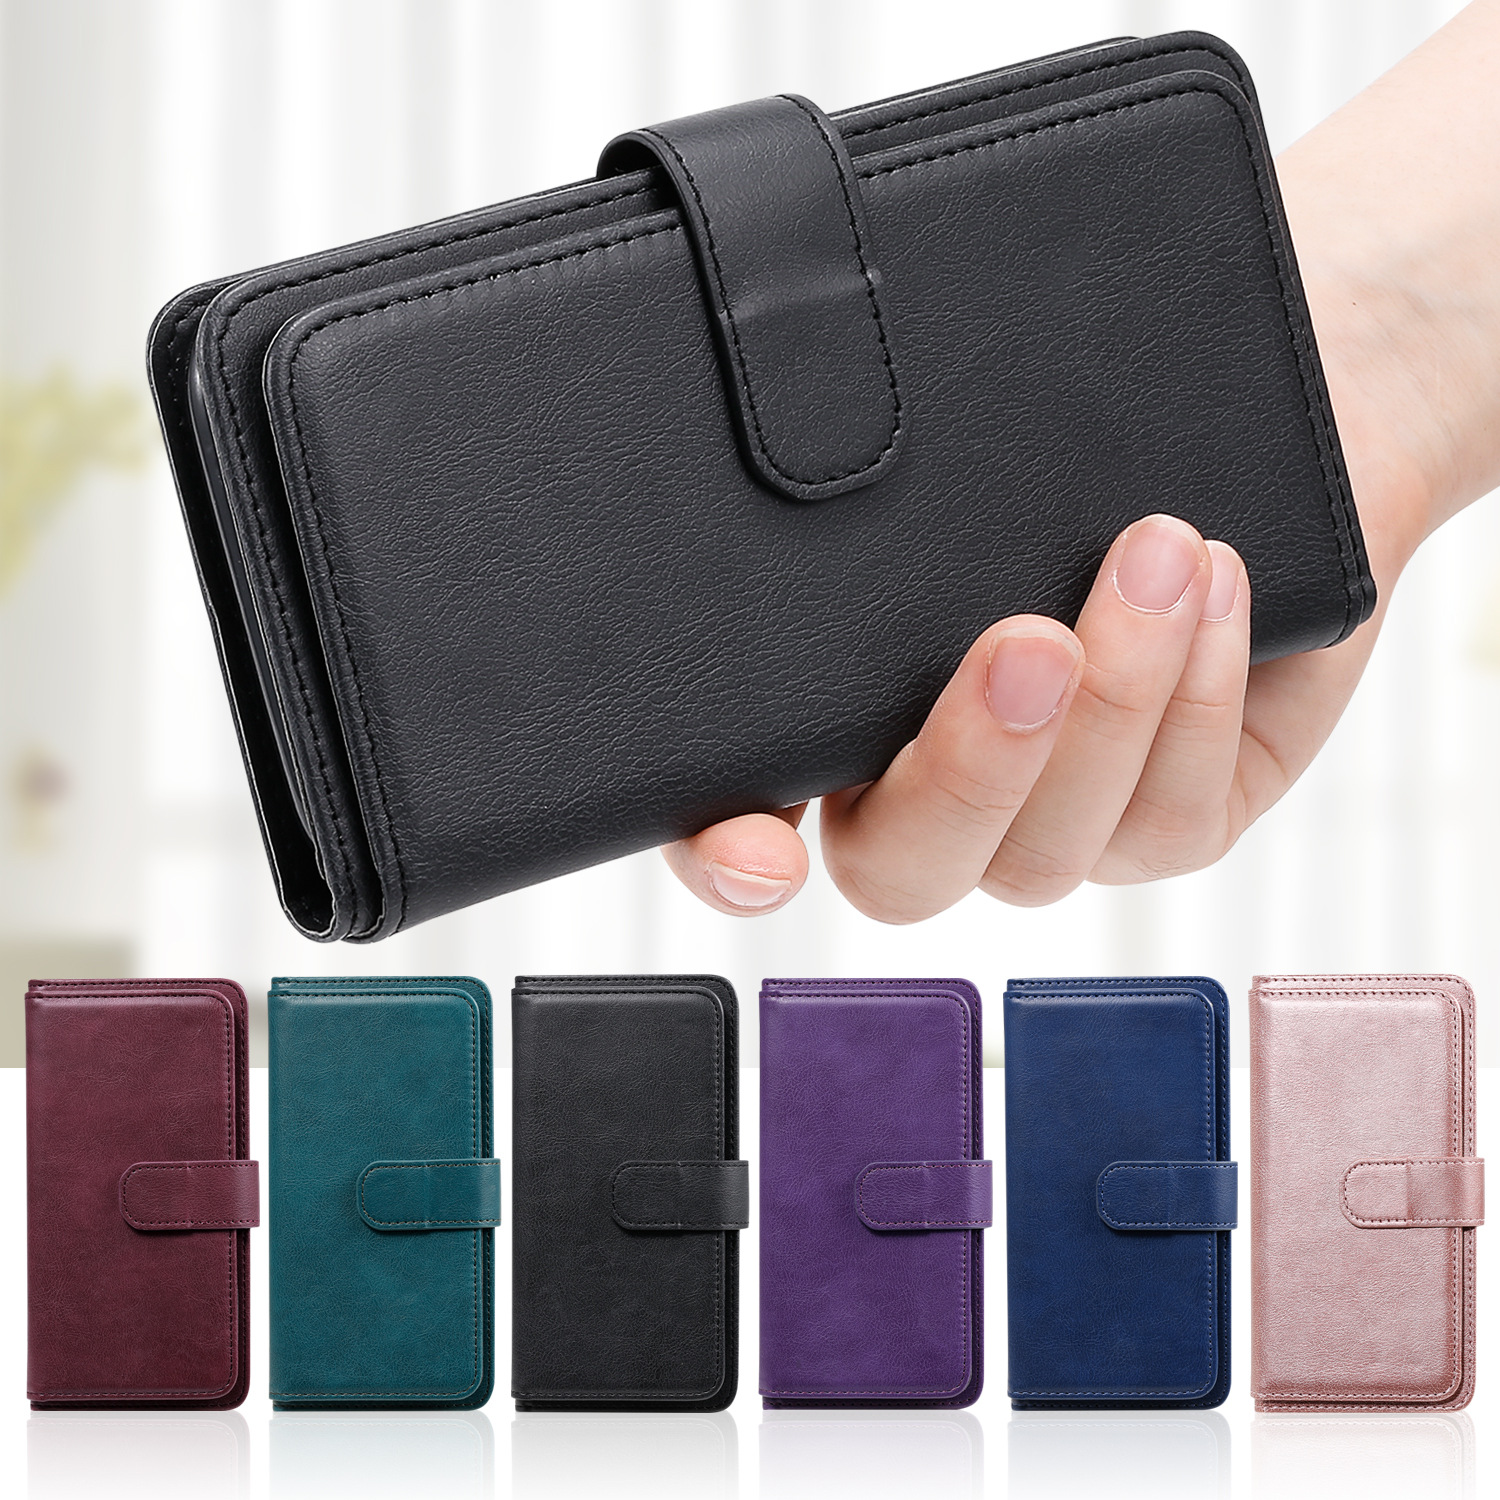 

For Samsung Galaxy A70 A50 A10 A20 A30 A40 A20E A20S Zipper Wallet Leather Case Card Slot Flip Stand Cover Mobile Phone Bag, Black